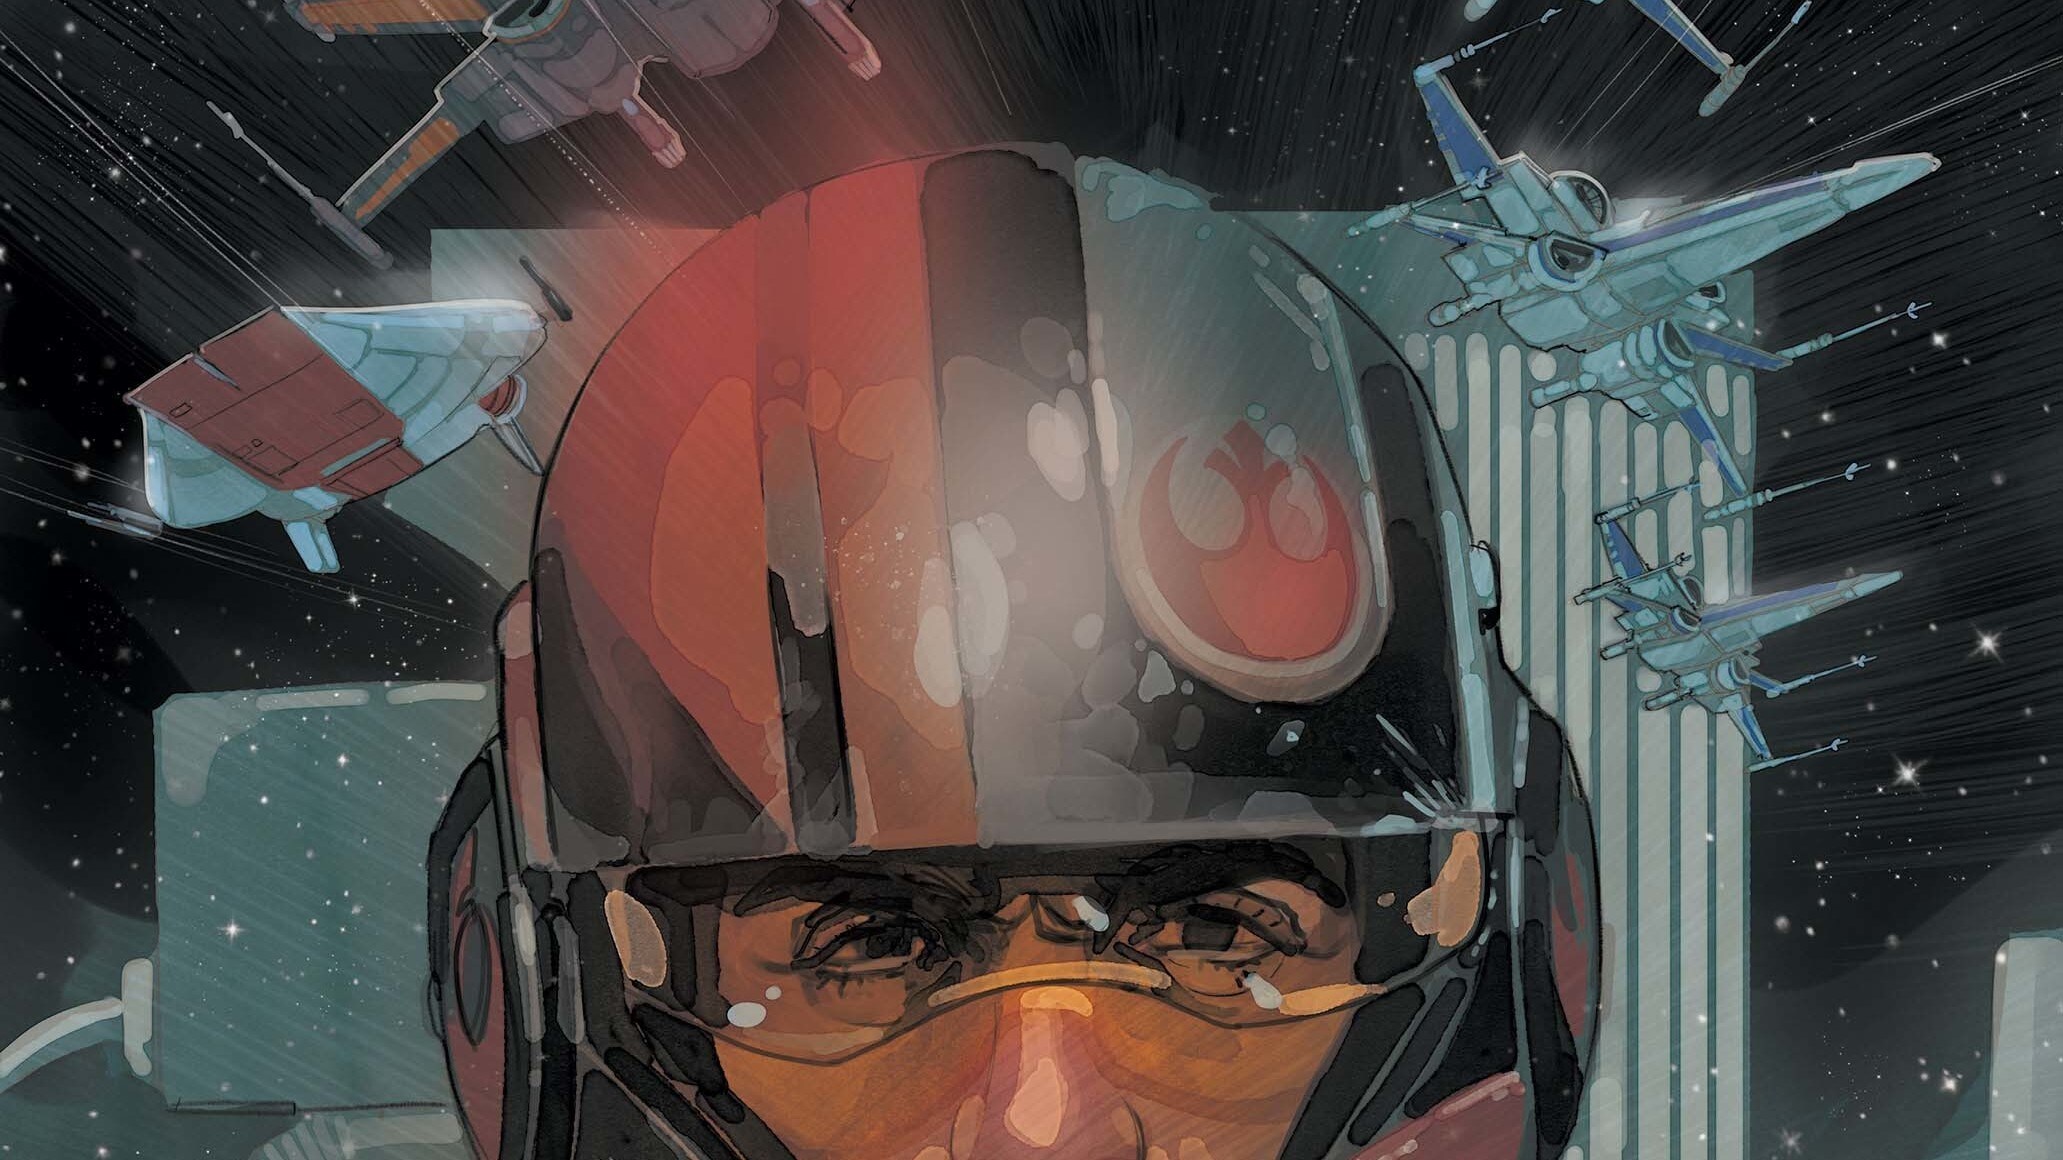 Go Inside Star Wars: Poe Dameron #1 with Artist Phil Noto - Exclusive Commentary!